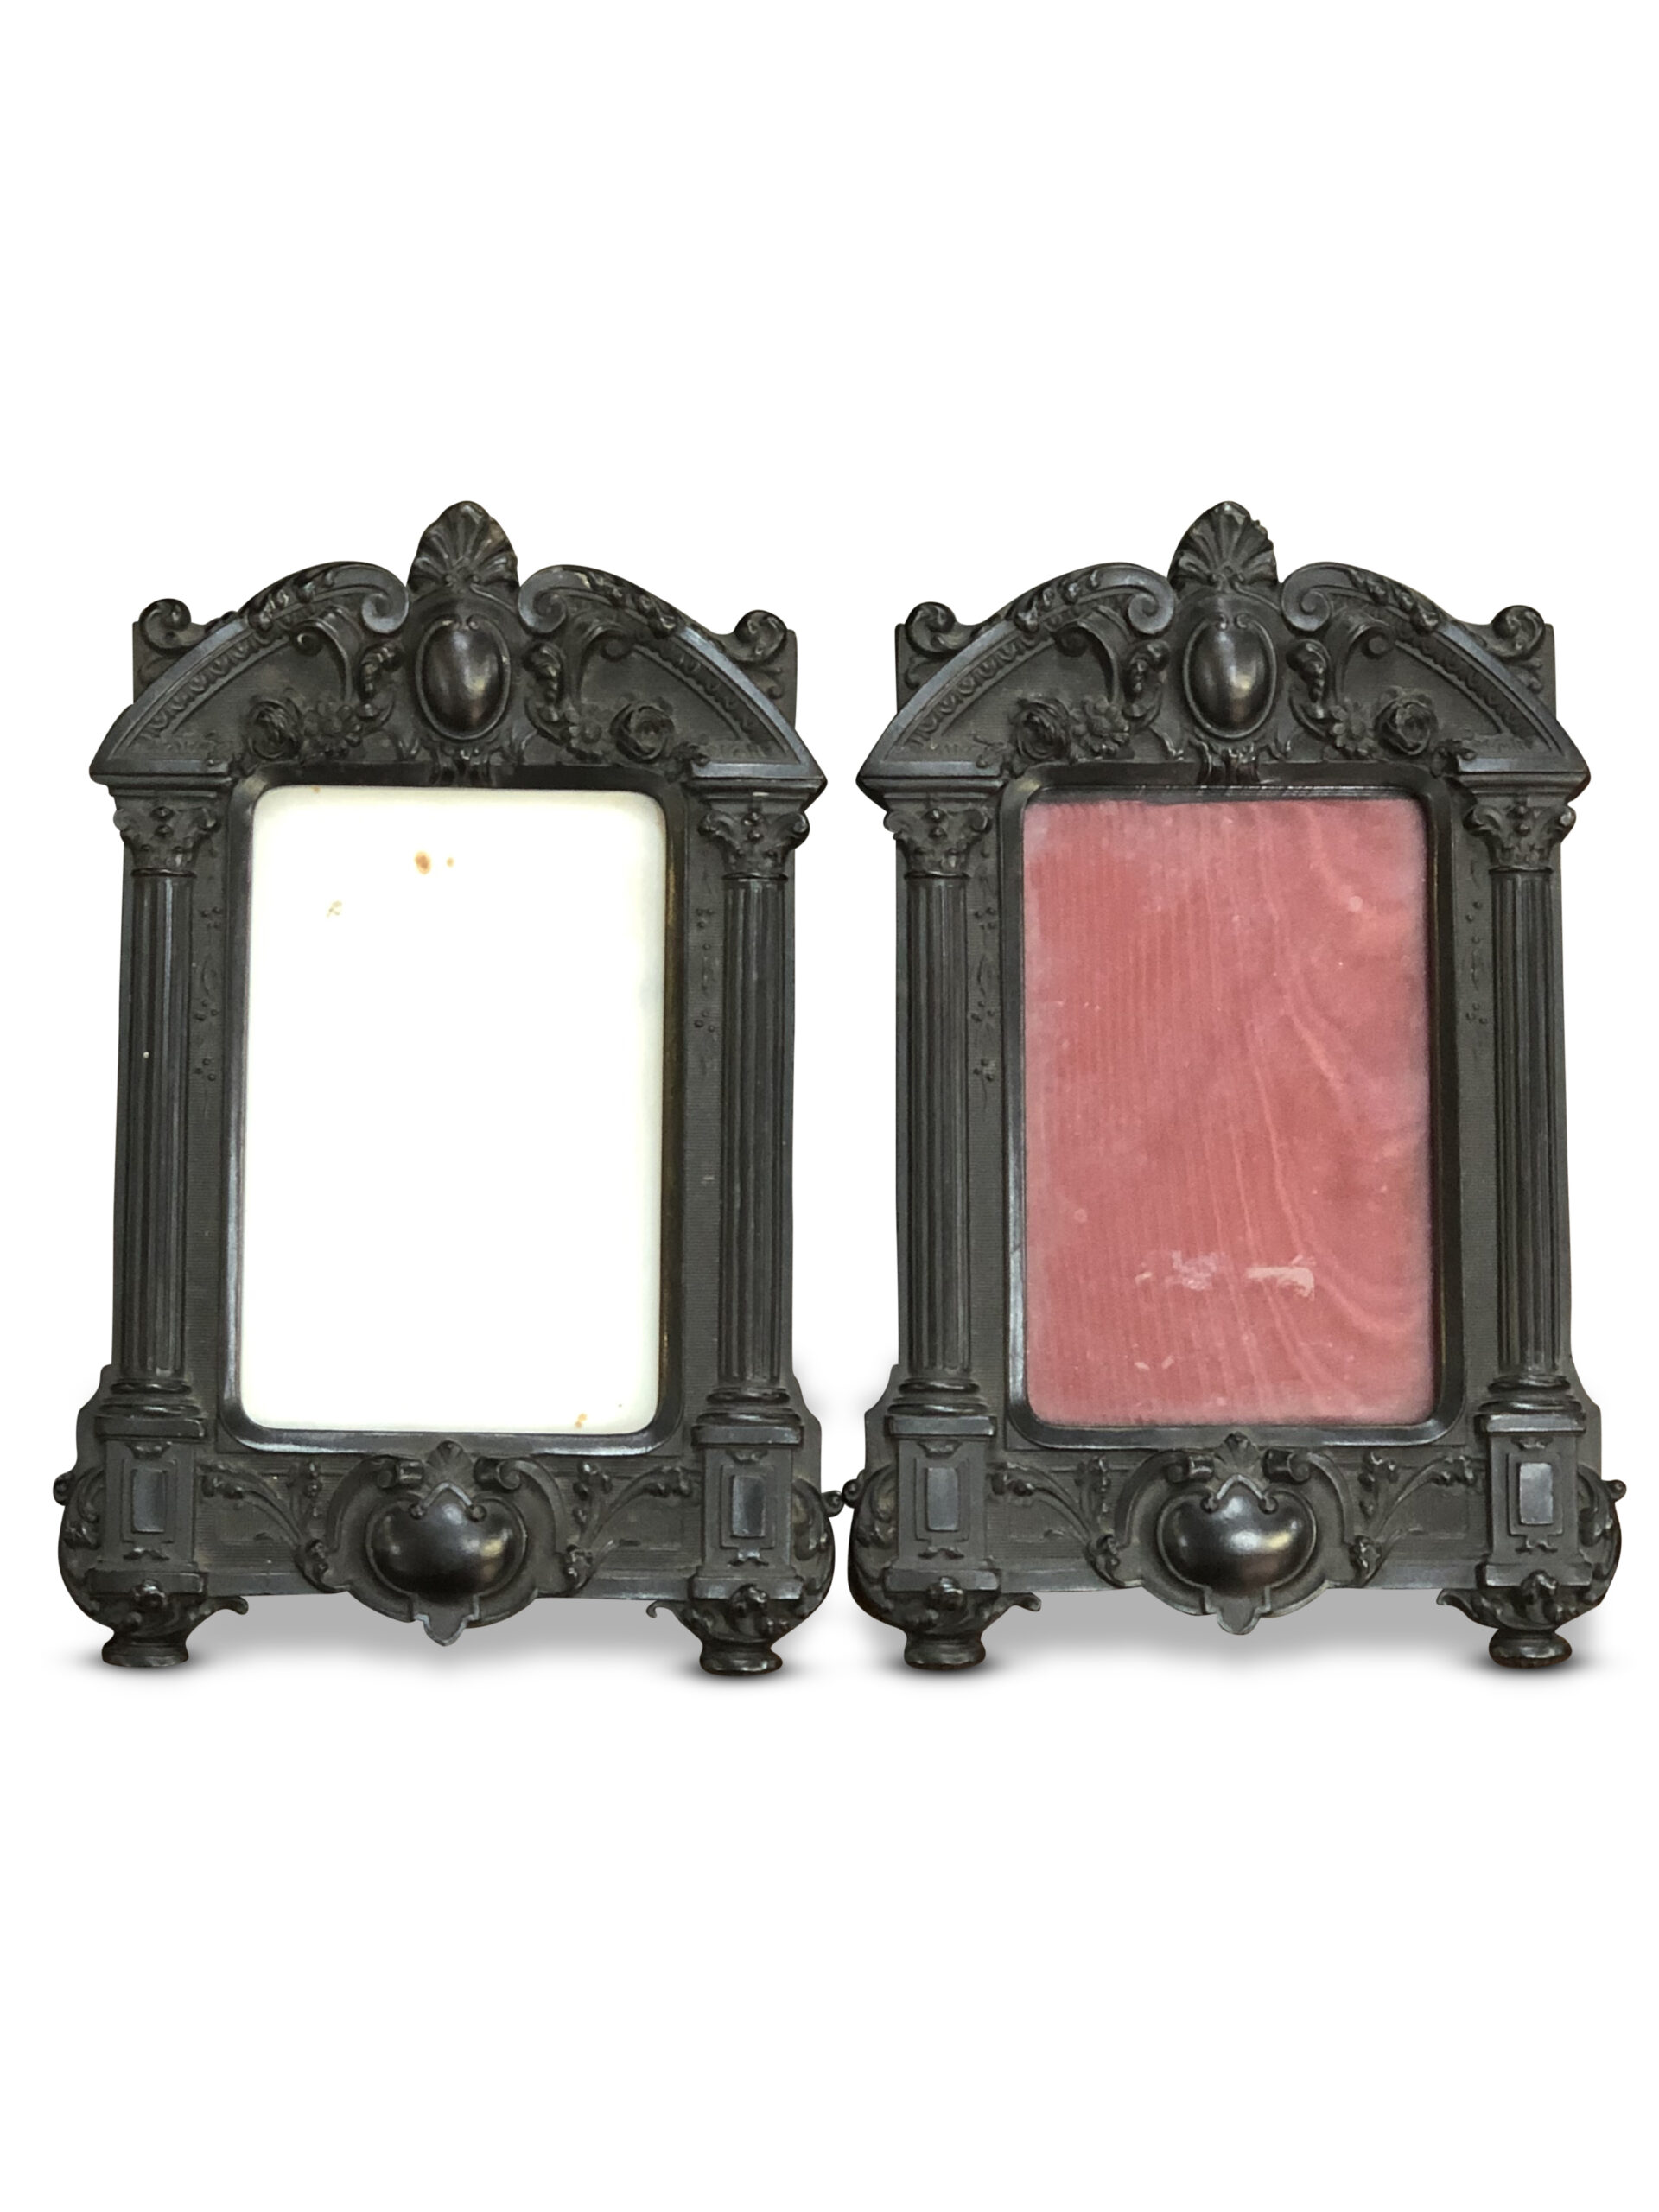 AAA104 Pair of 19th Century Decorative Frames scaled 1